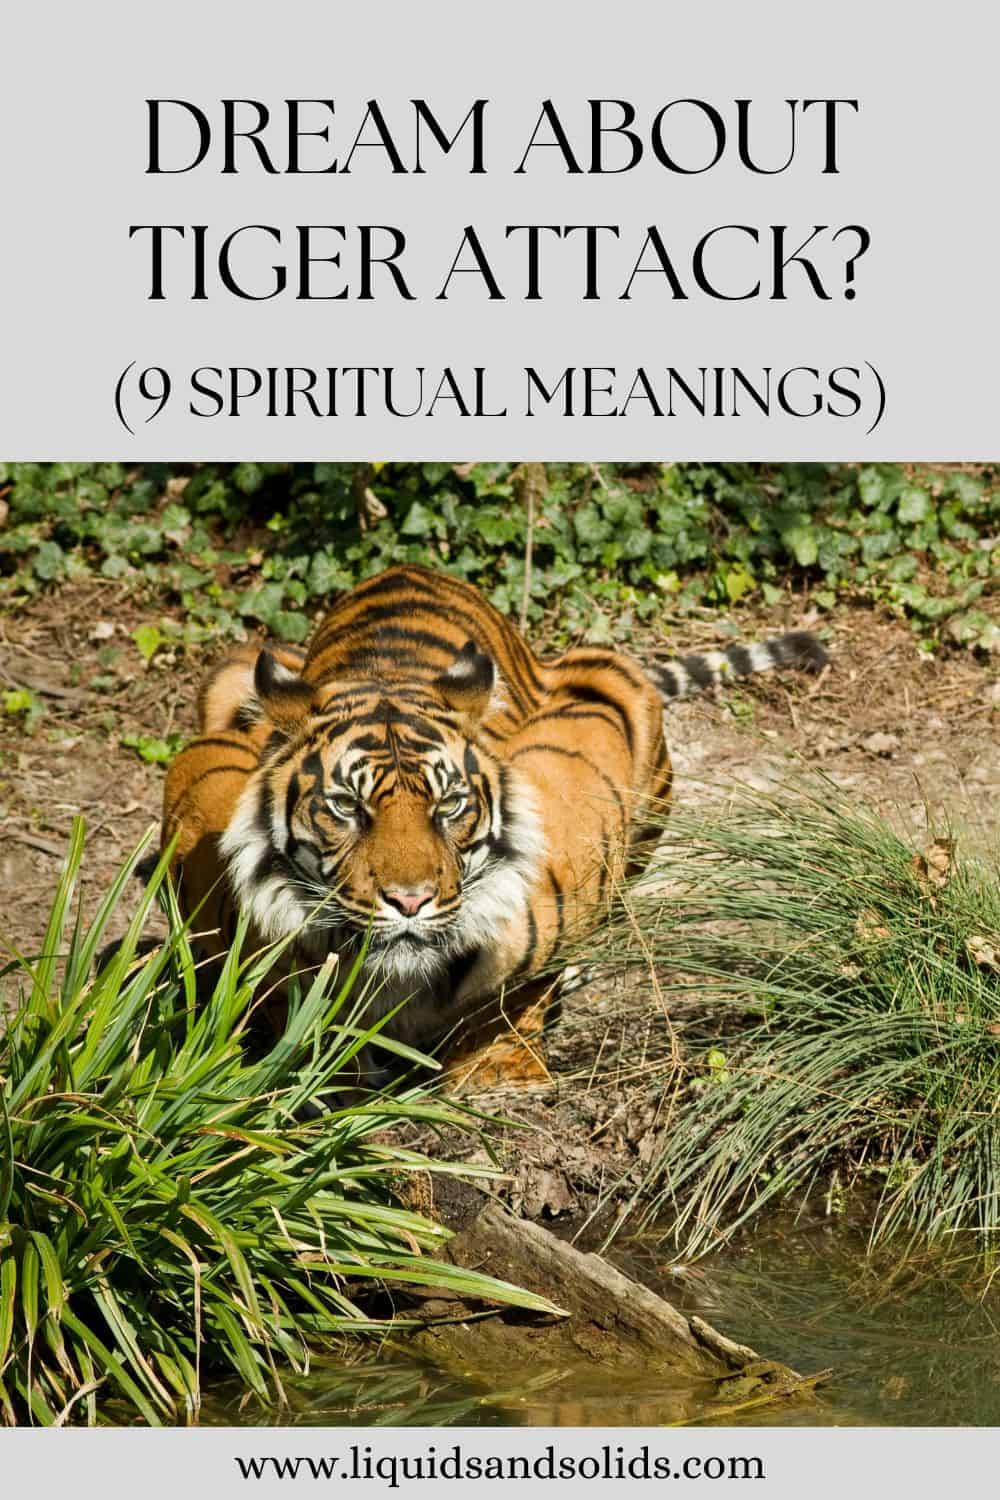 Dream About Tiger Attack? (9 Spiritual Meanings)